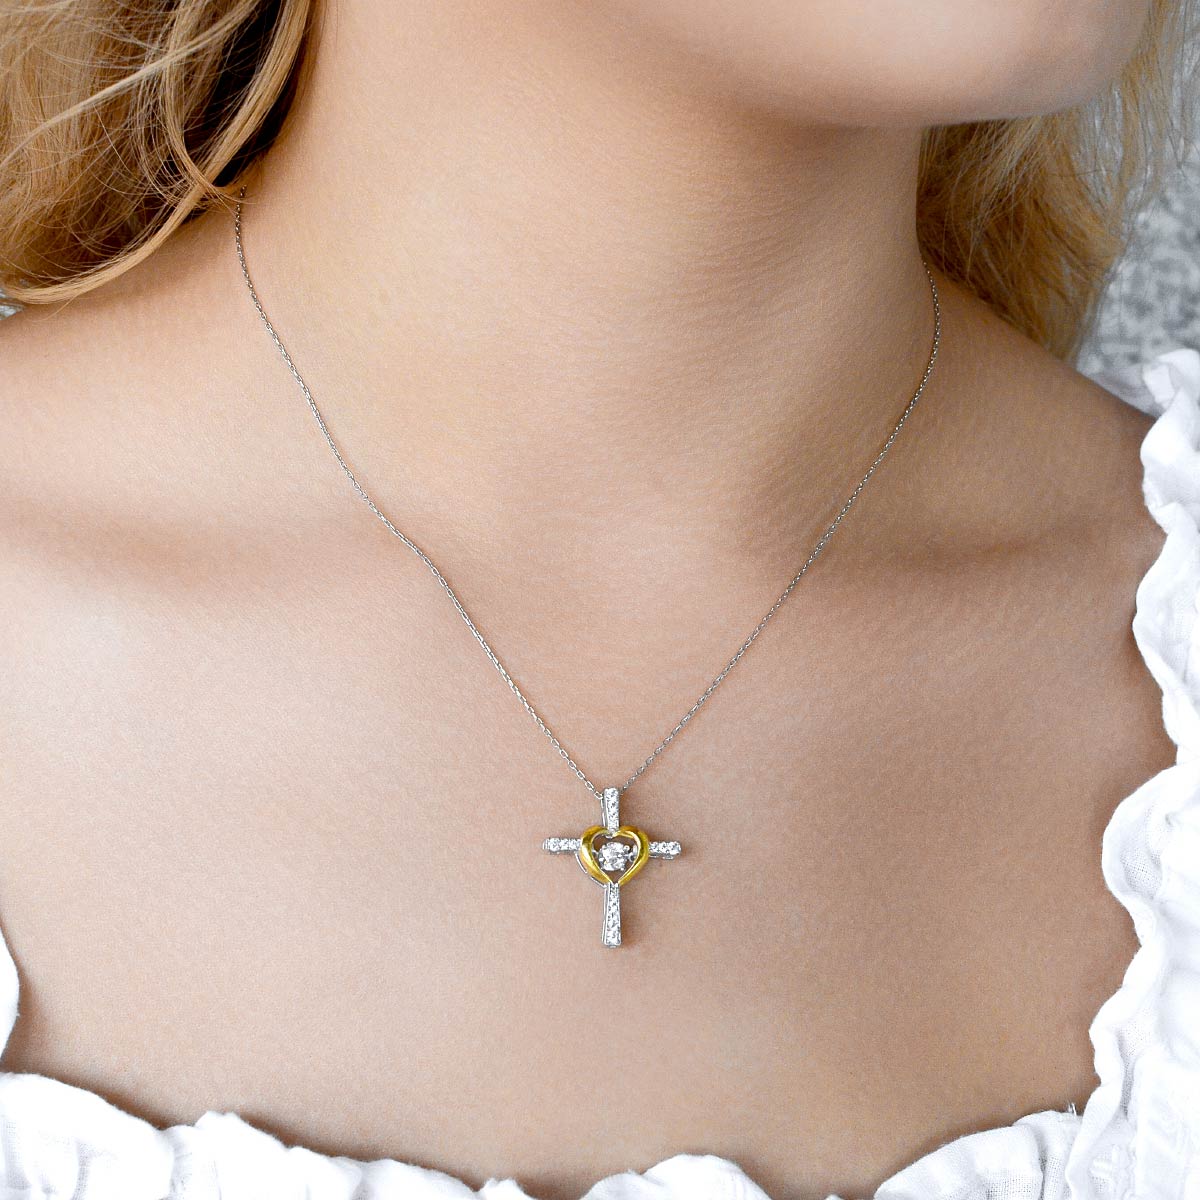 To My Wife, Love is Patient - Dancing Crystal Heart Cross Necklace Gift Set